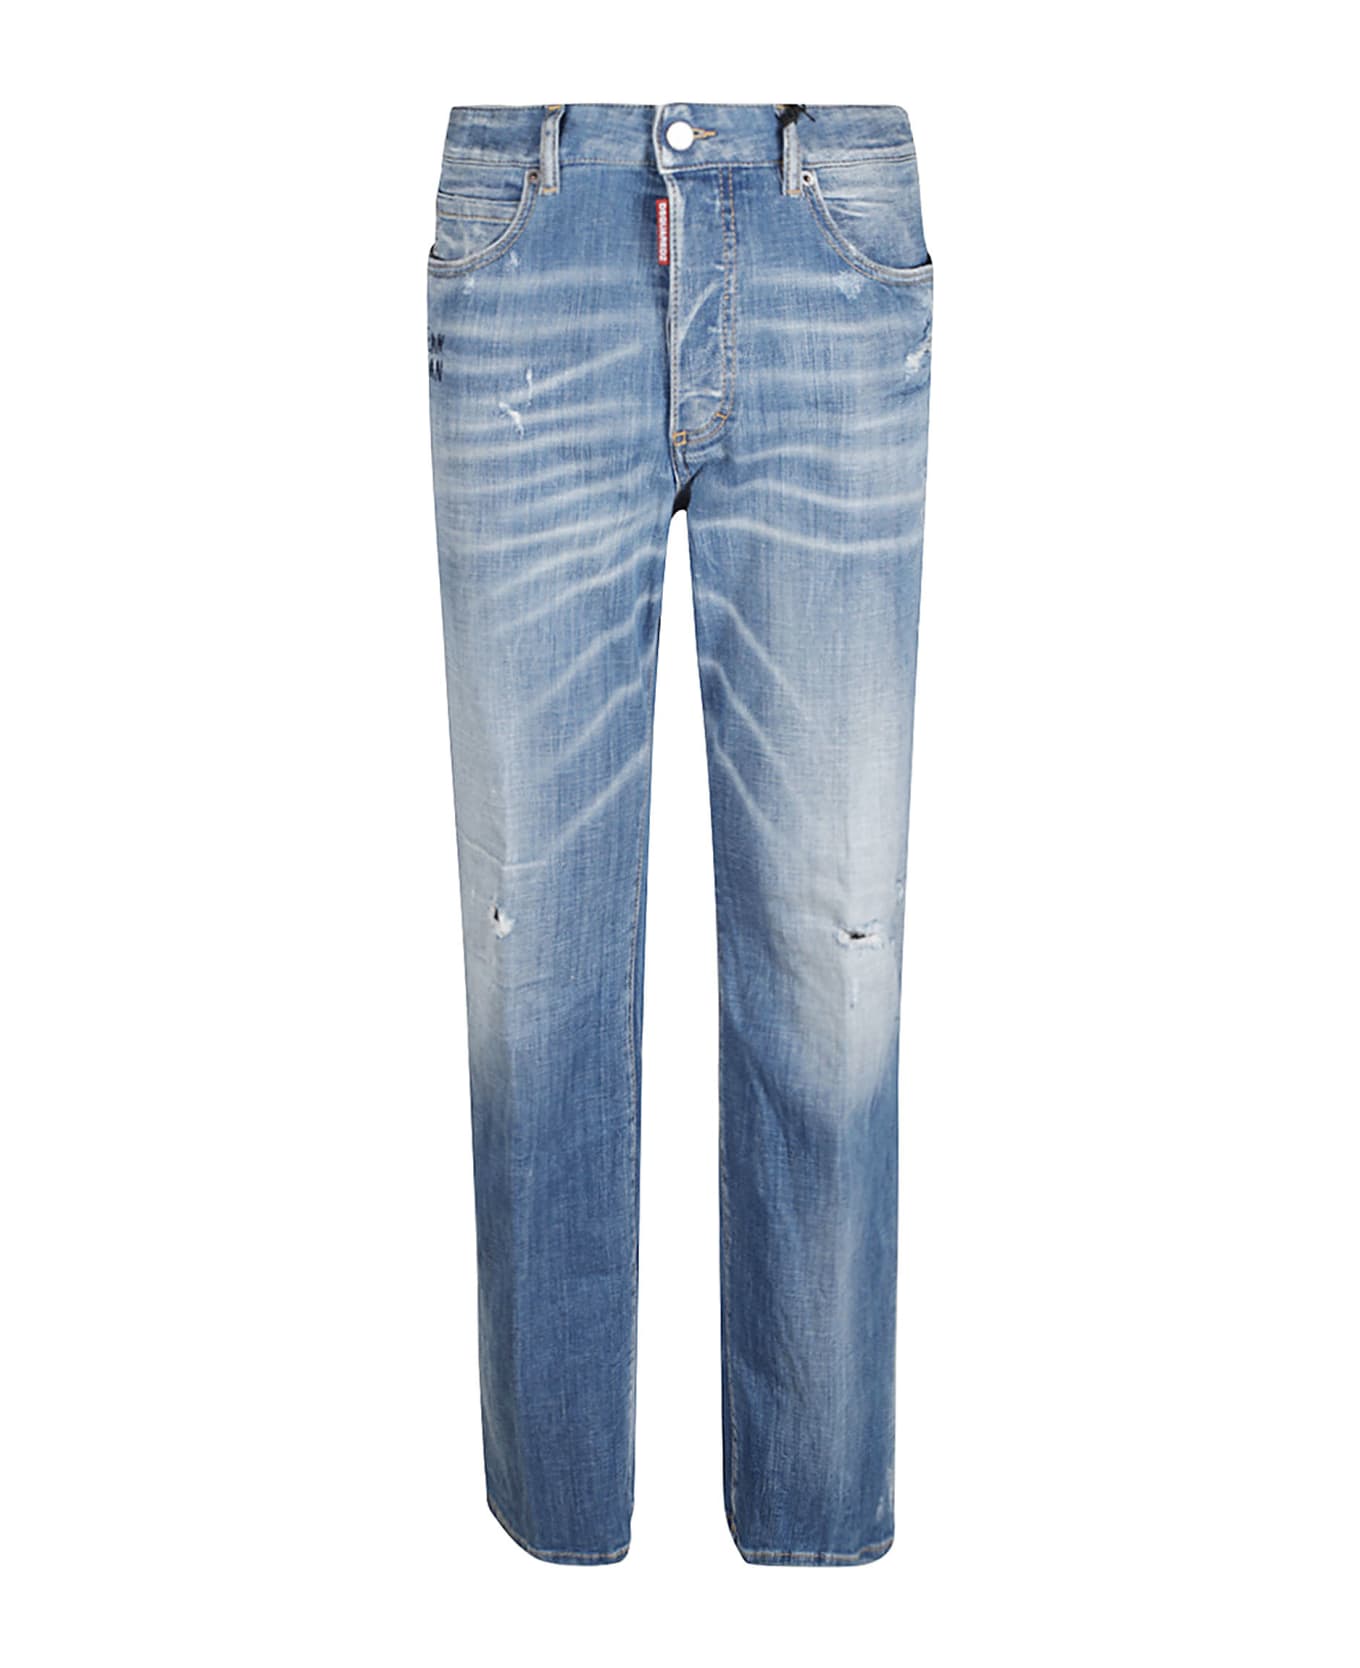 Dsquared2 Roadie Jeans - Navy Blue